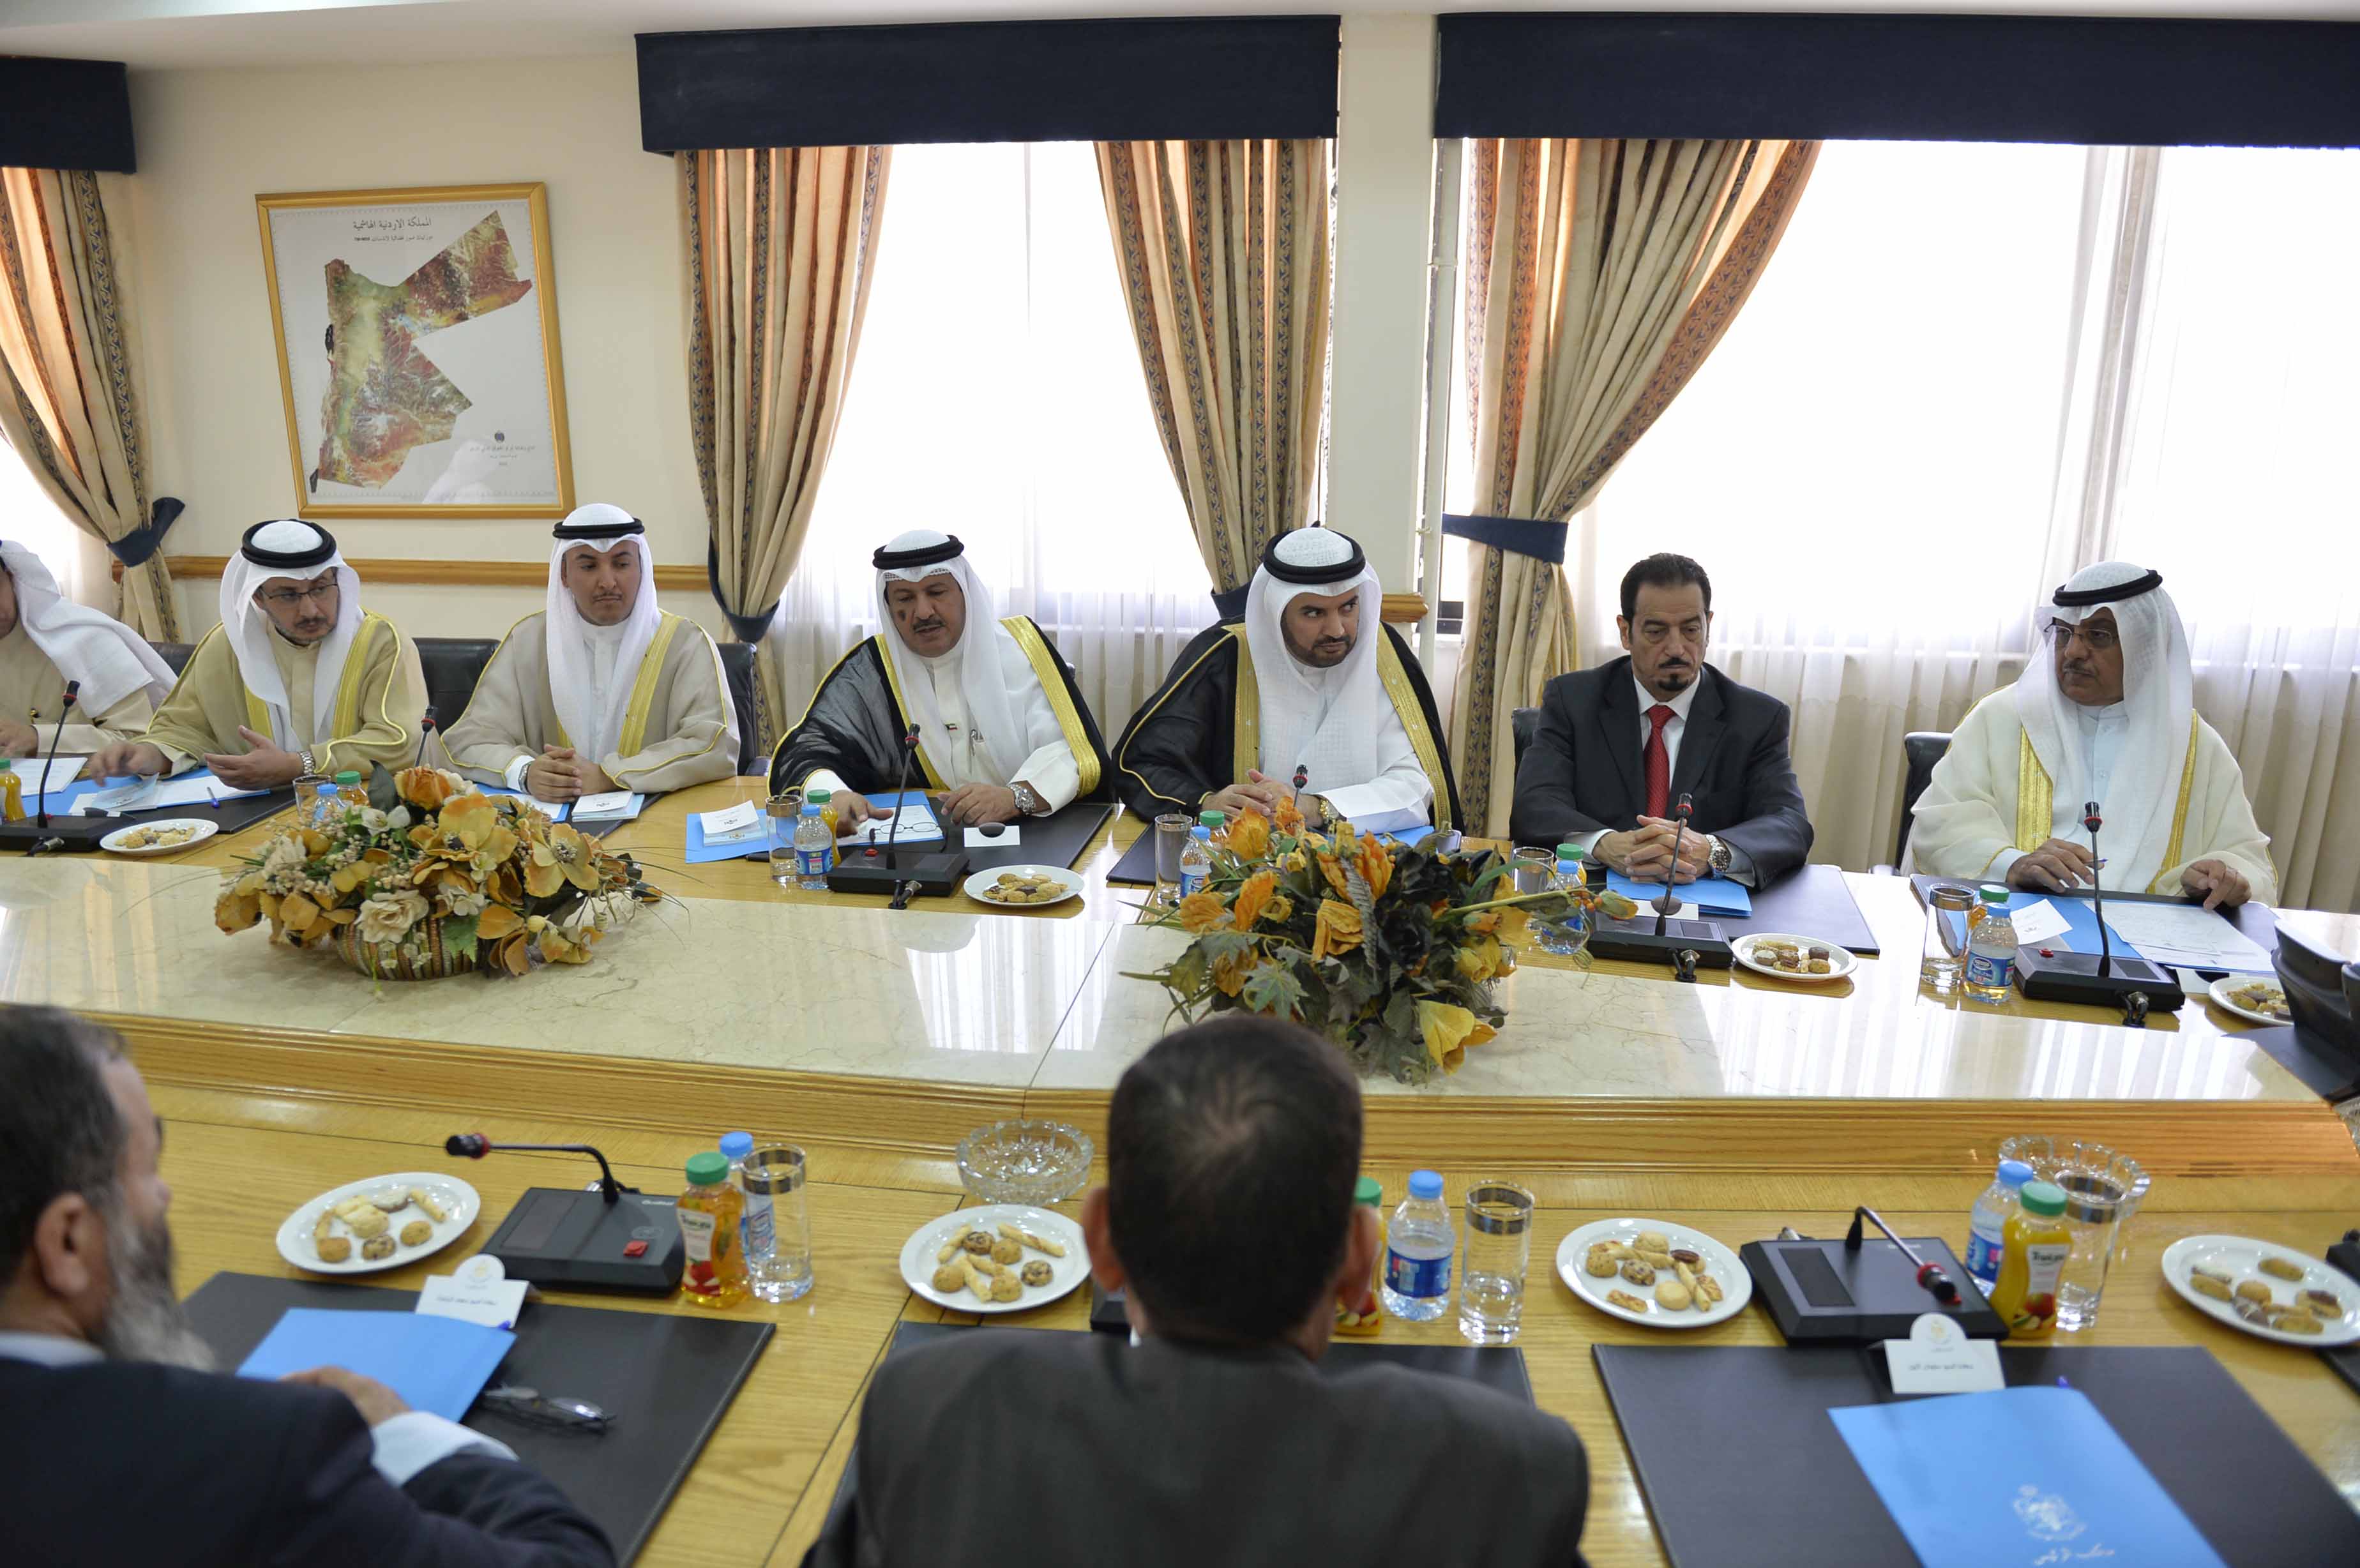 Kuwaiti delegation of MPs during their meeting with their Jordanian counterparts